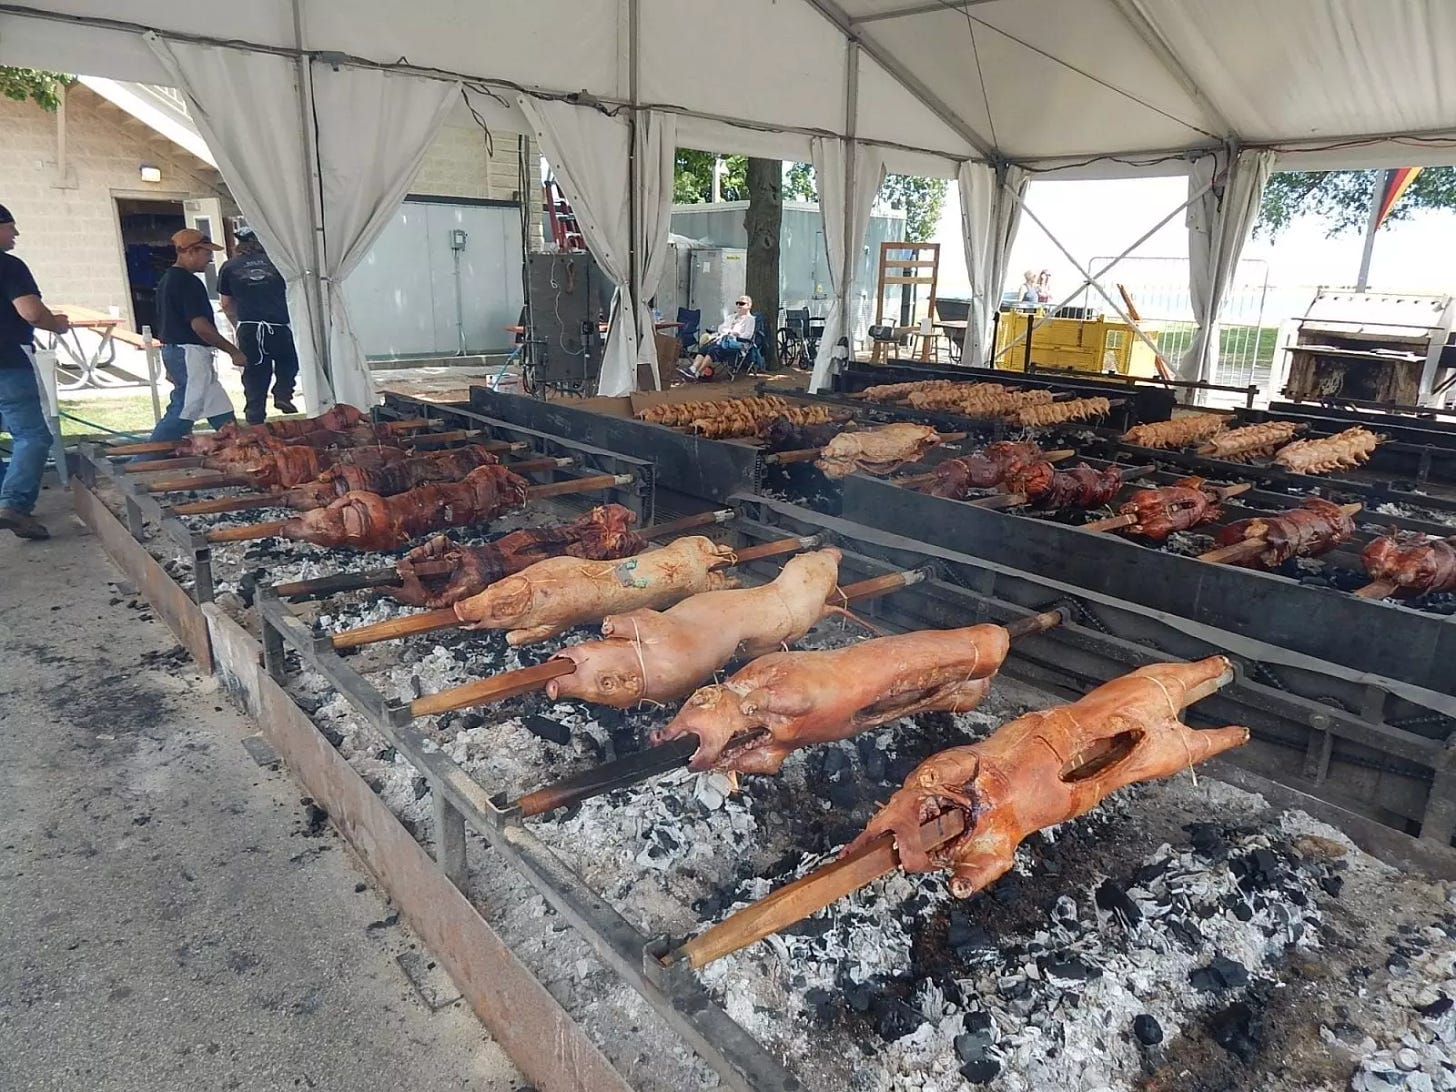 What is Spanferkel? A Roasted Pig, Perfect for Any German Festival!